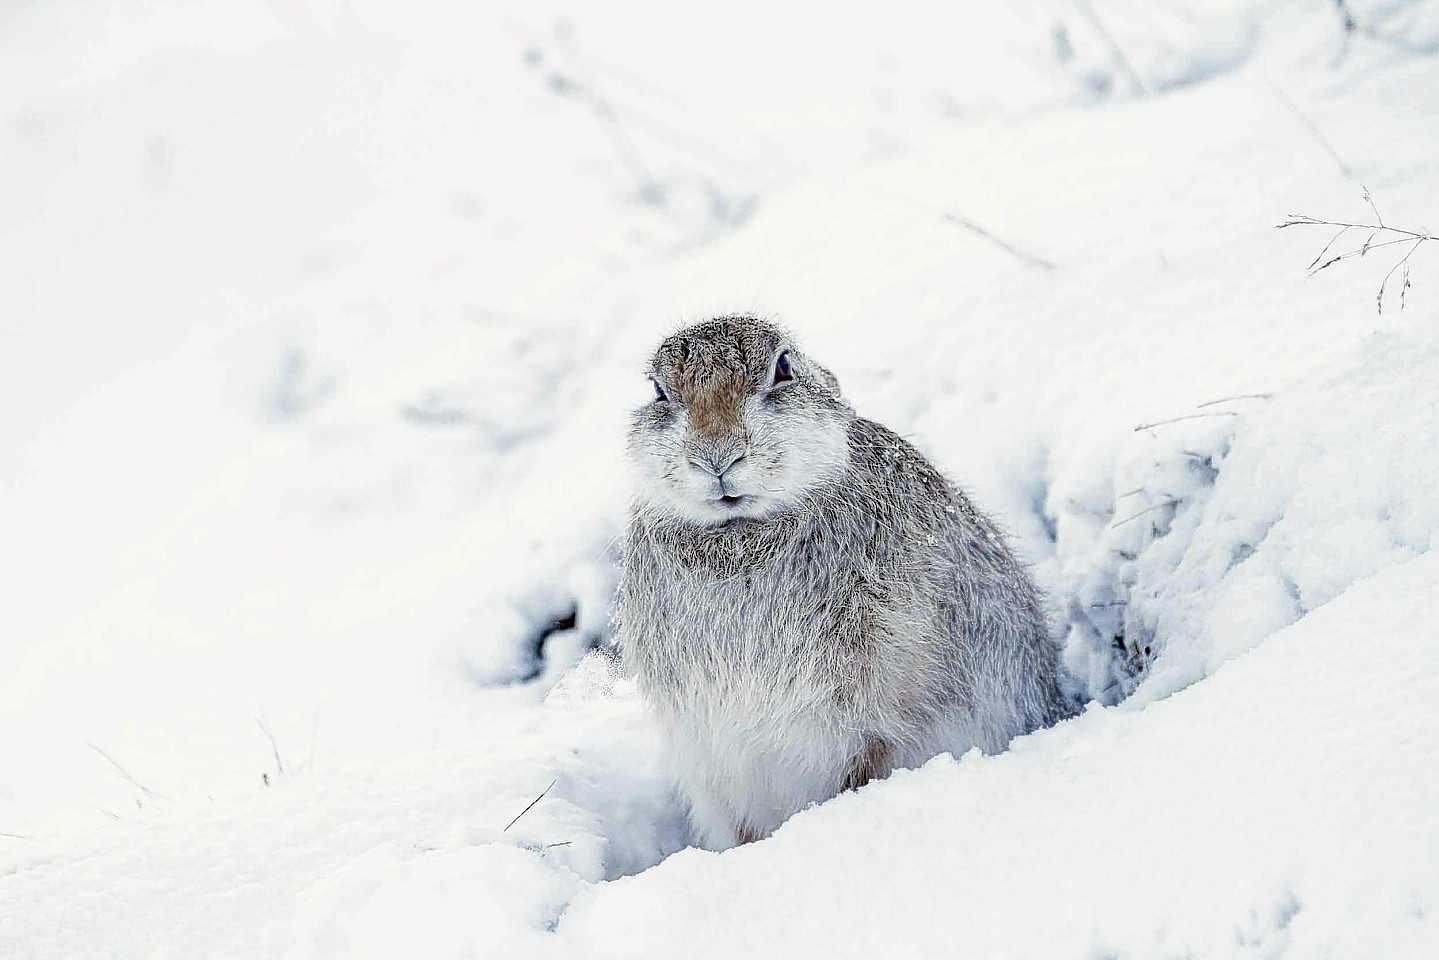 The mountain hare braves the chill